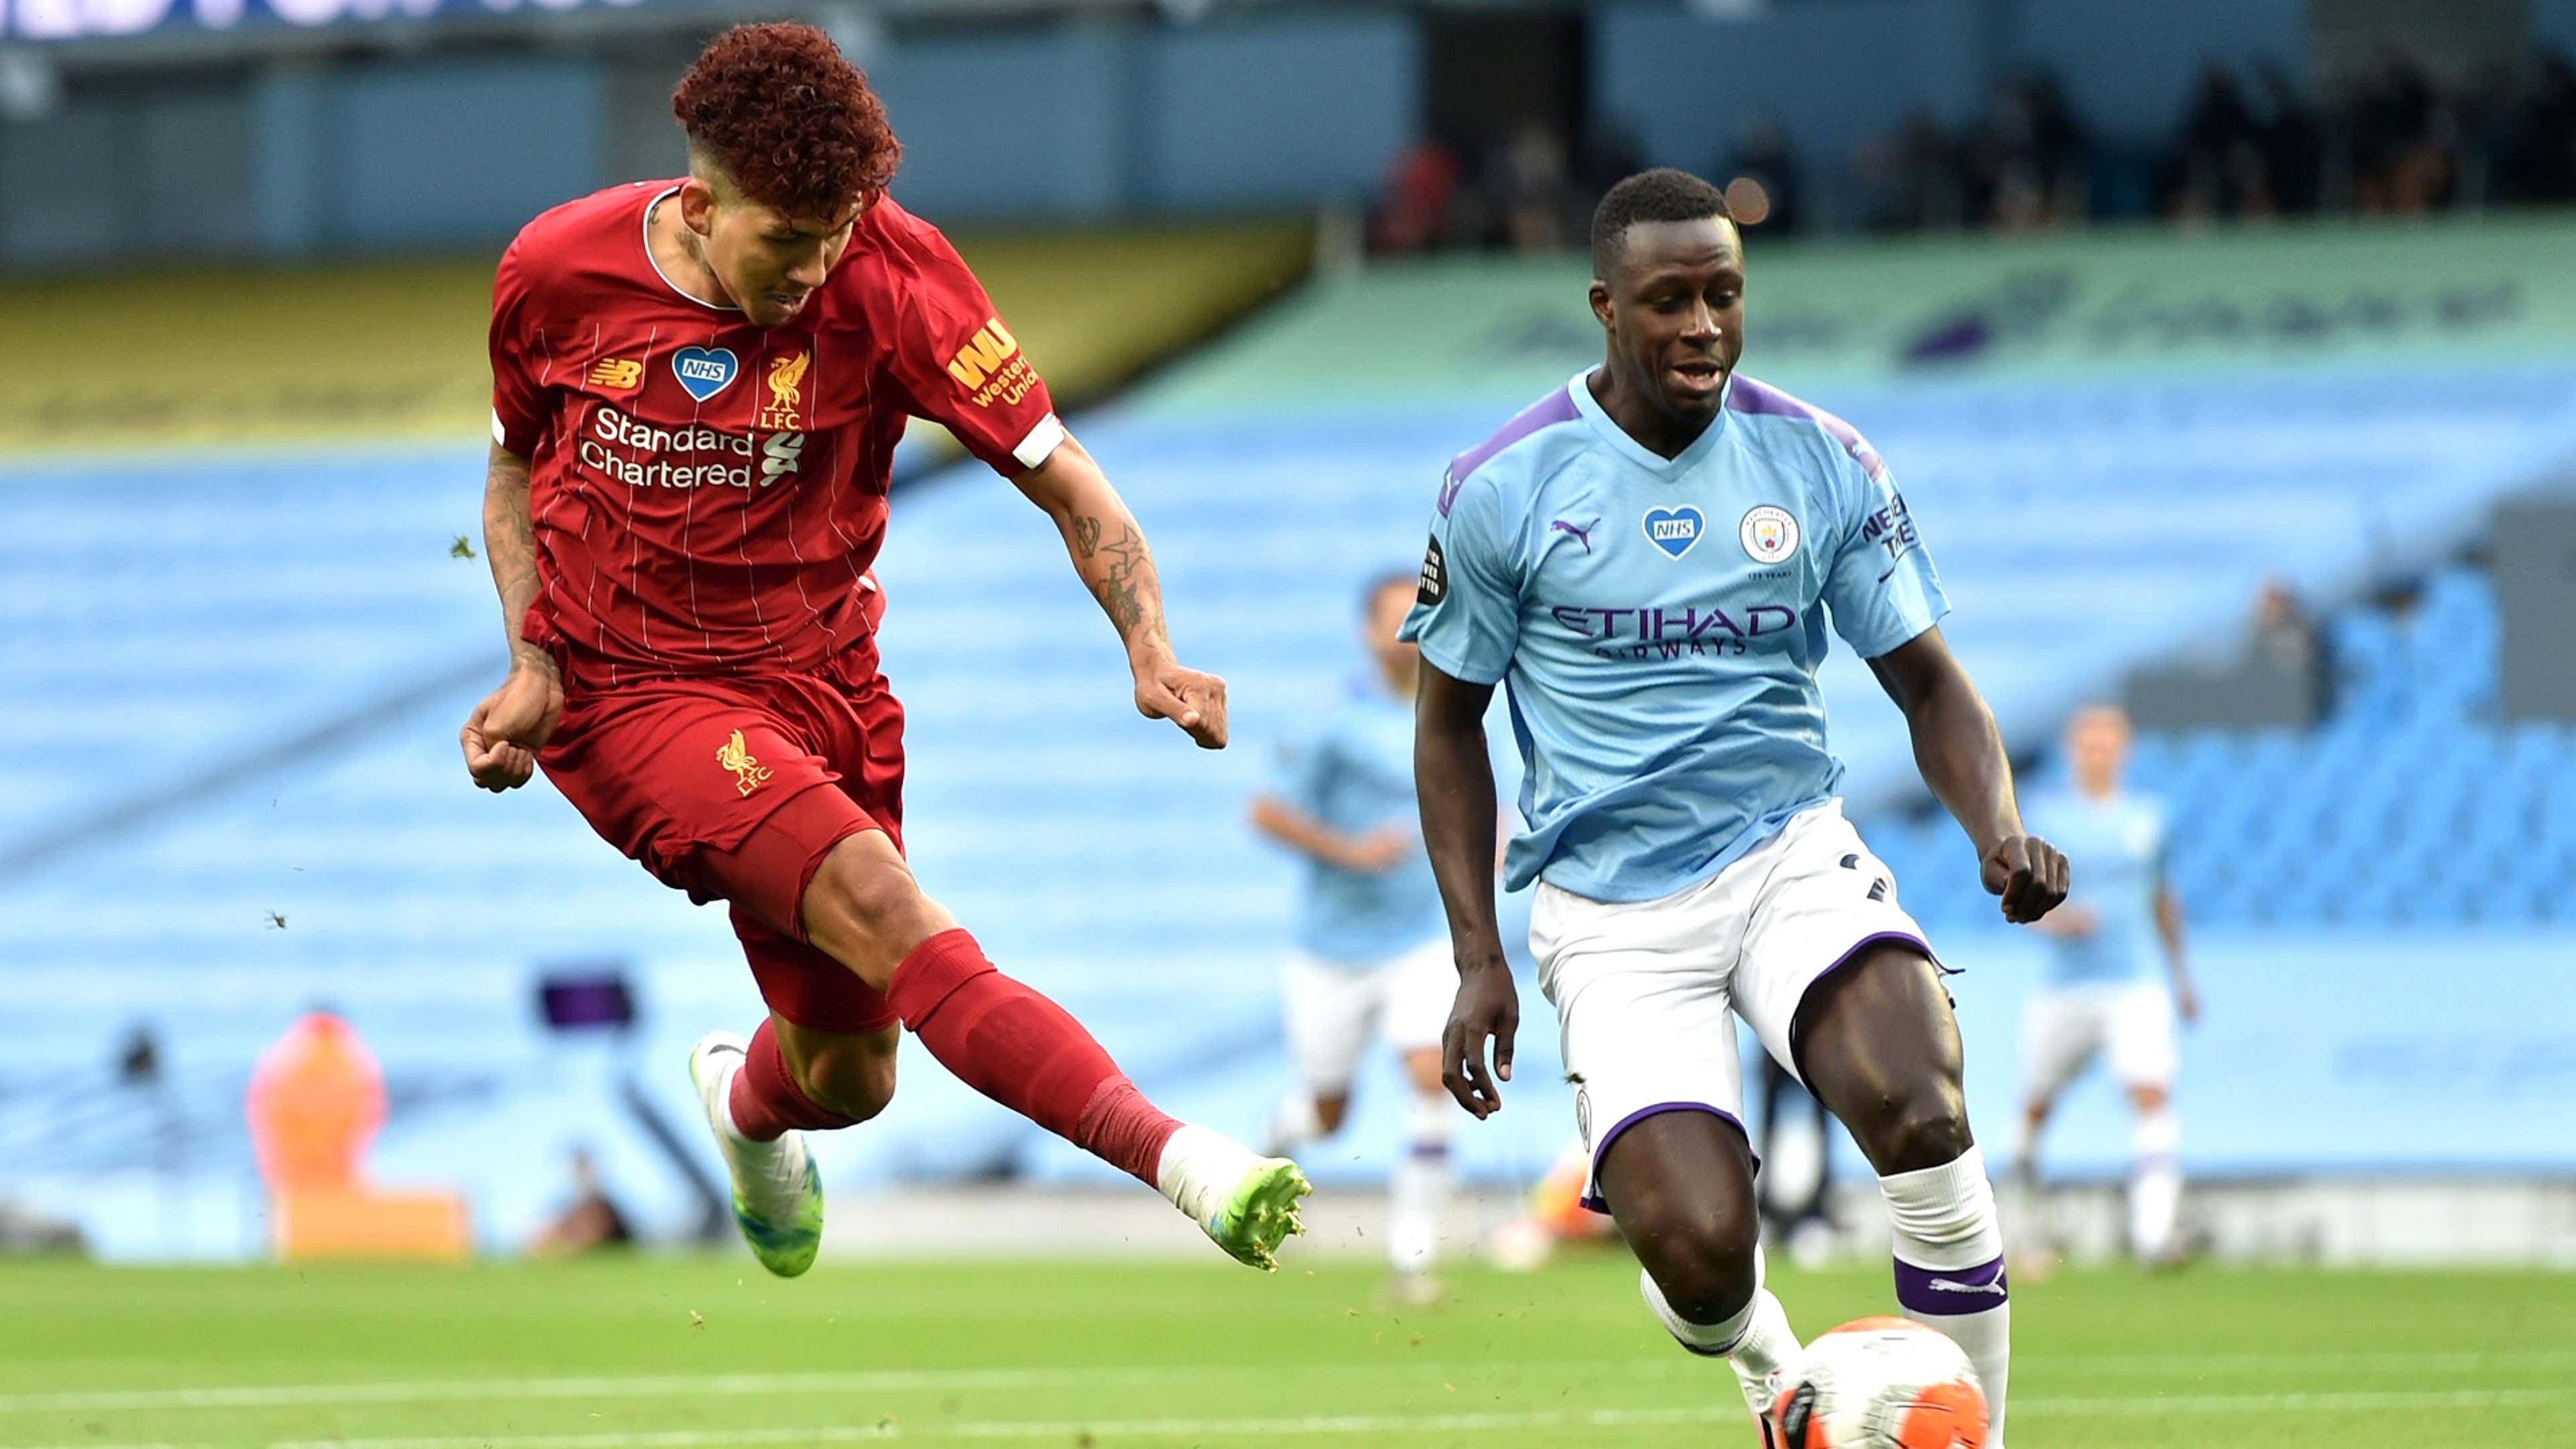 Man City vs Liverpool: Prediction and Preview